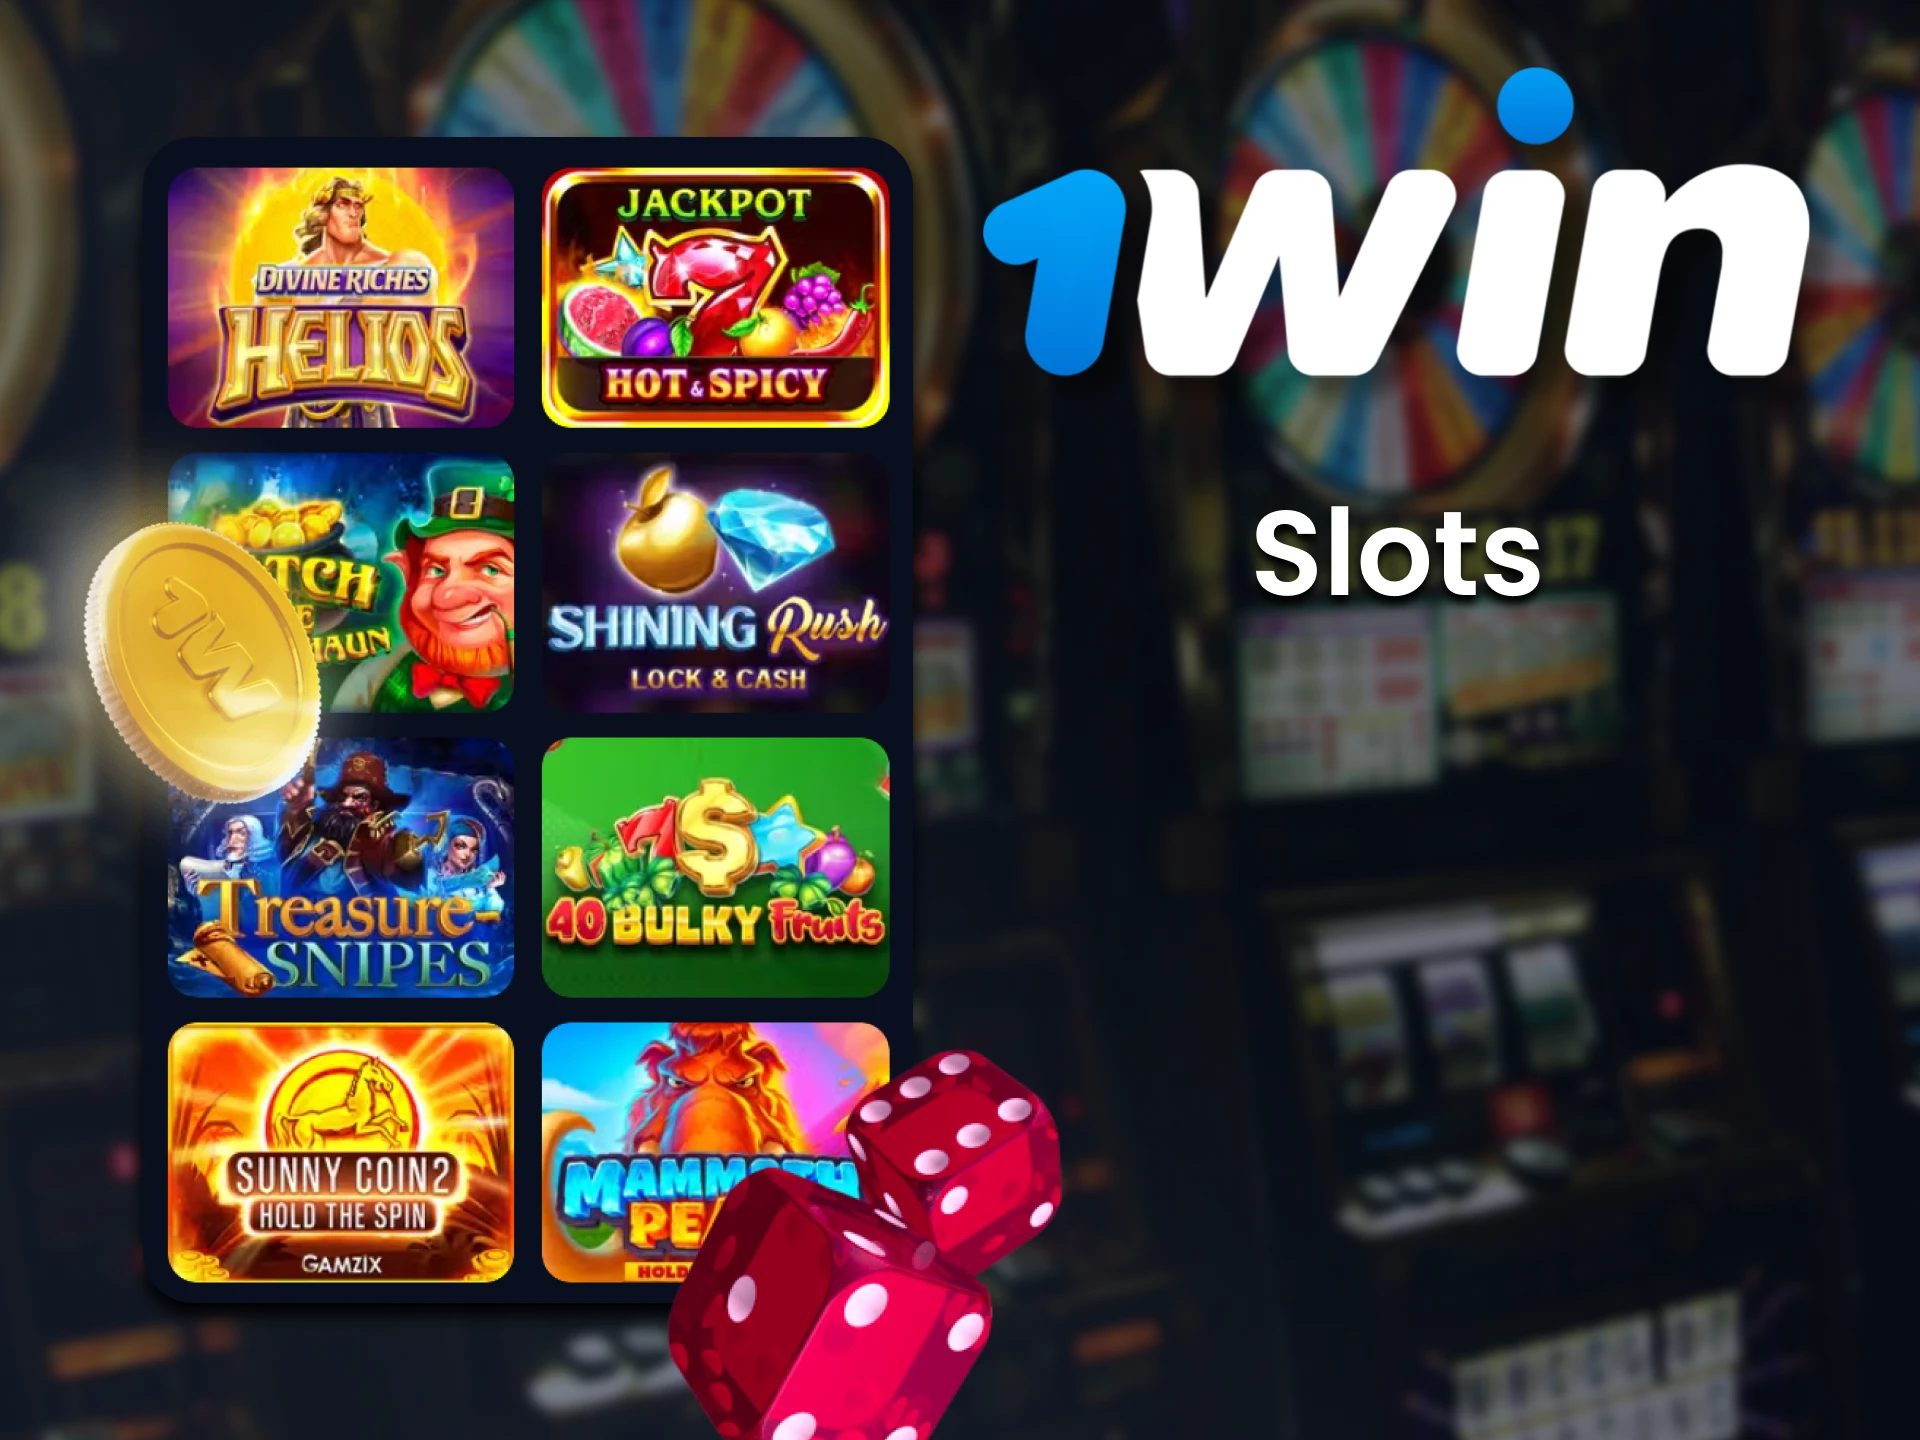 Play slot games from the best providers at 1win Online Casino.